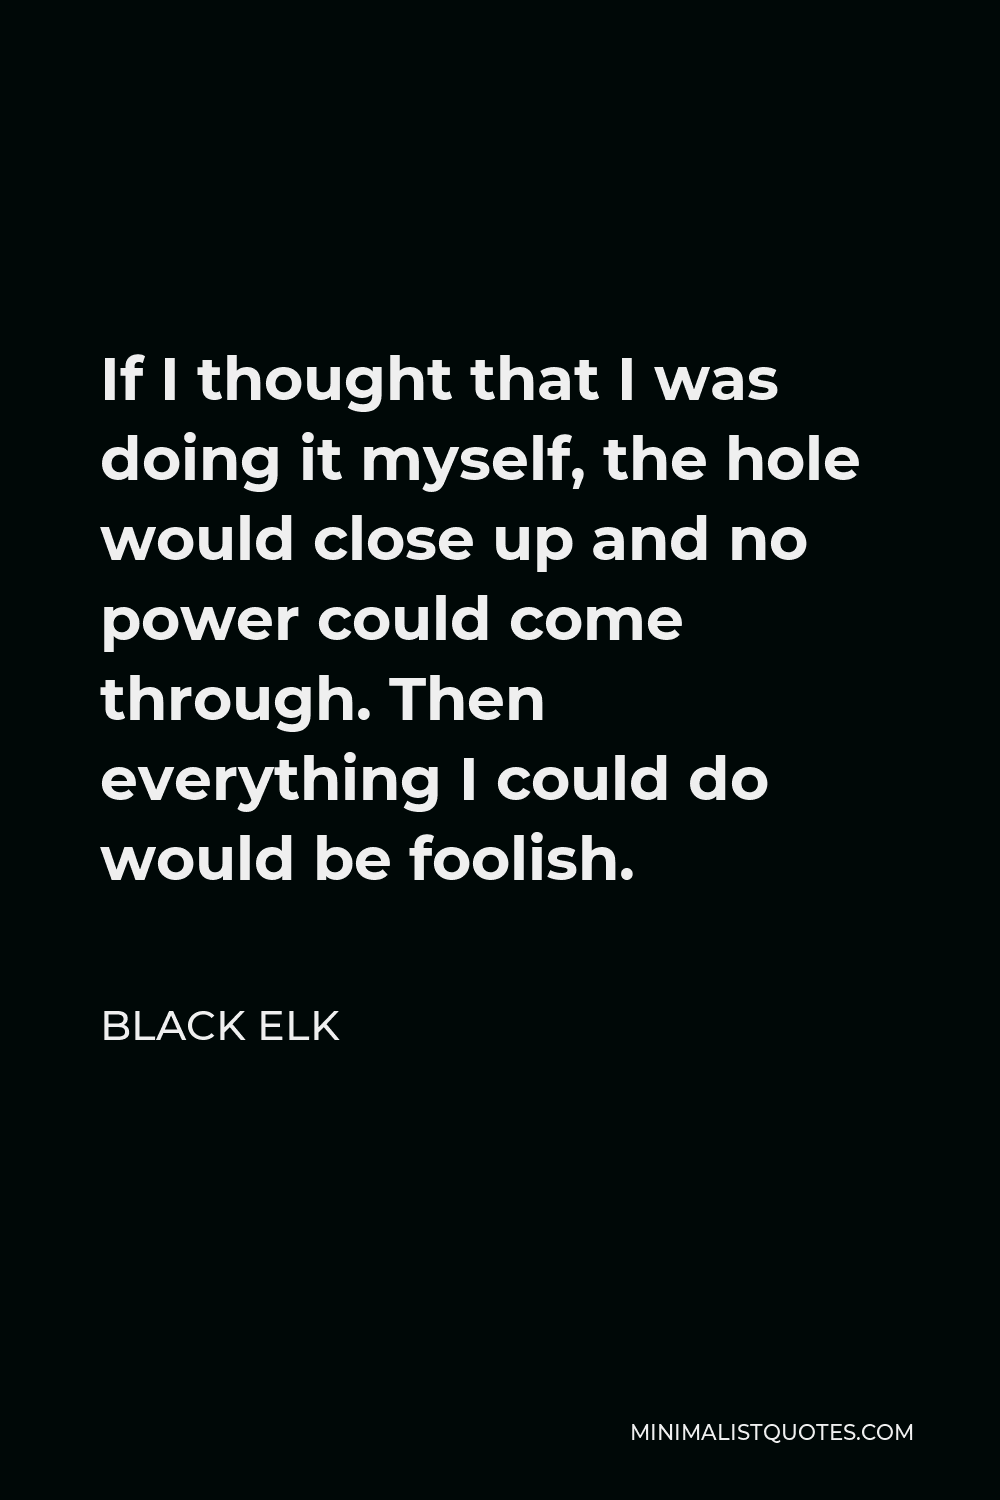 Black Elk Quote - If I thought that I was doing it myself, the hole would close up and no power could come through. Then everything I could do would be foolish.